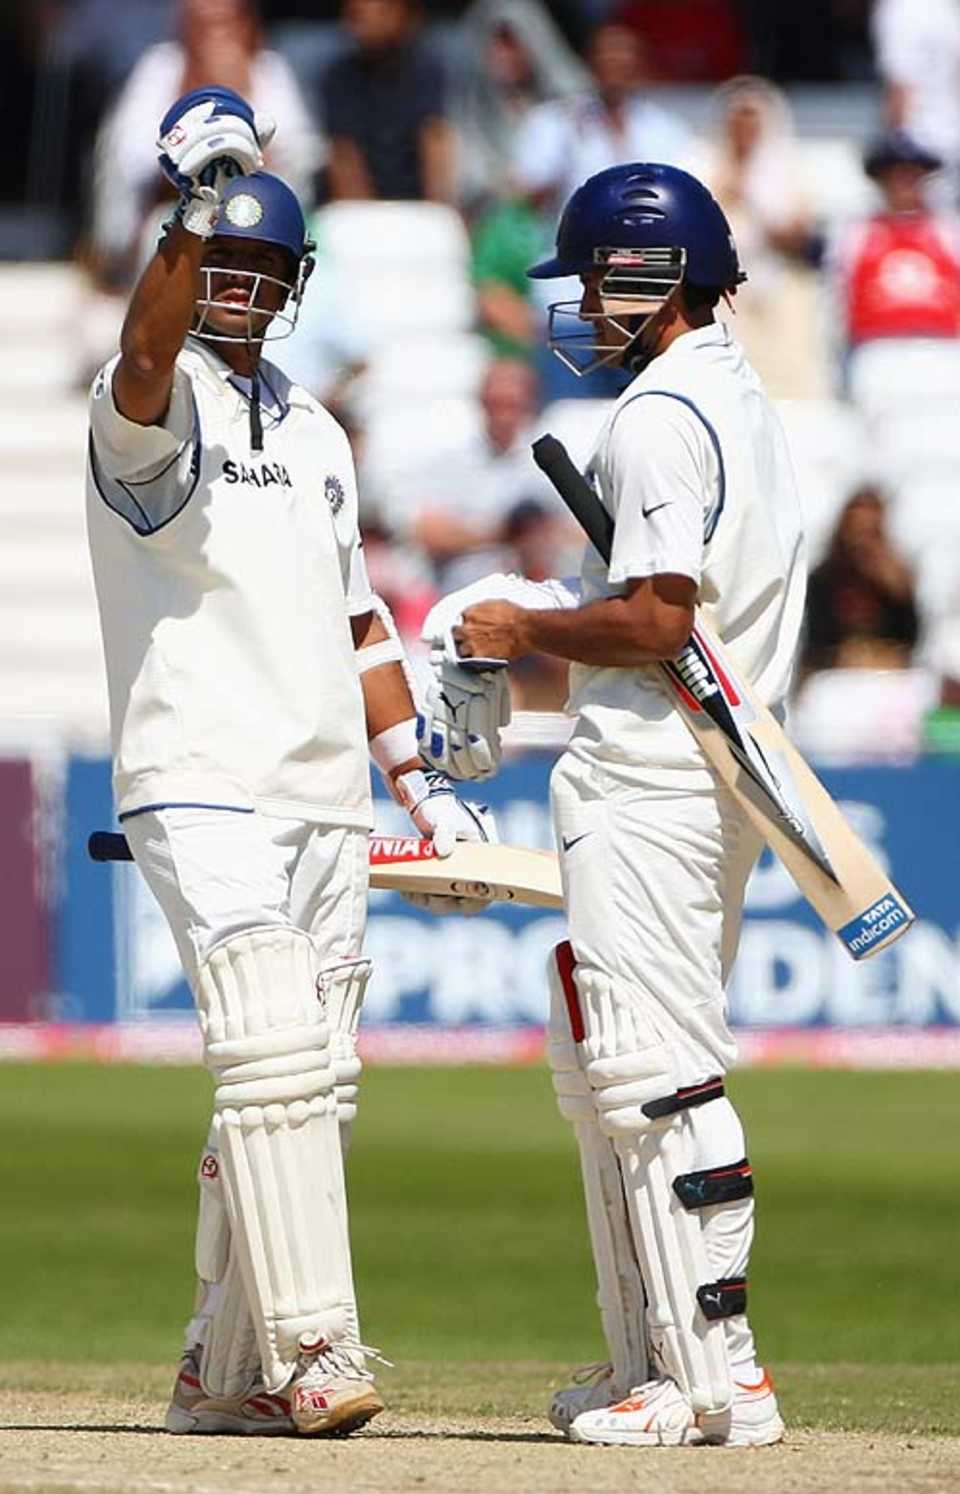 Rahul Dravid and Sourav Ganguly took India through to the target, England v India, 2nd Test, Trent Bridge, 5th day, July 31, 2007